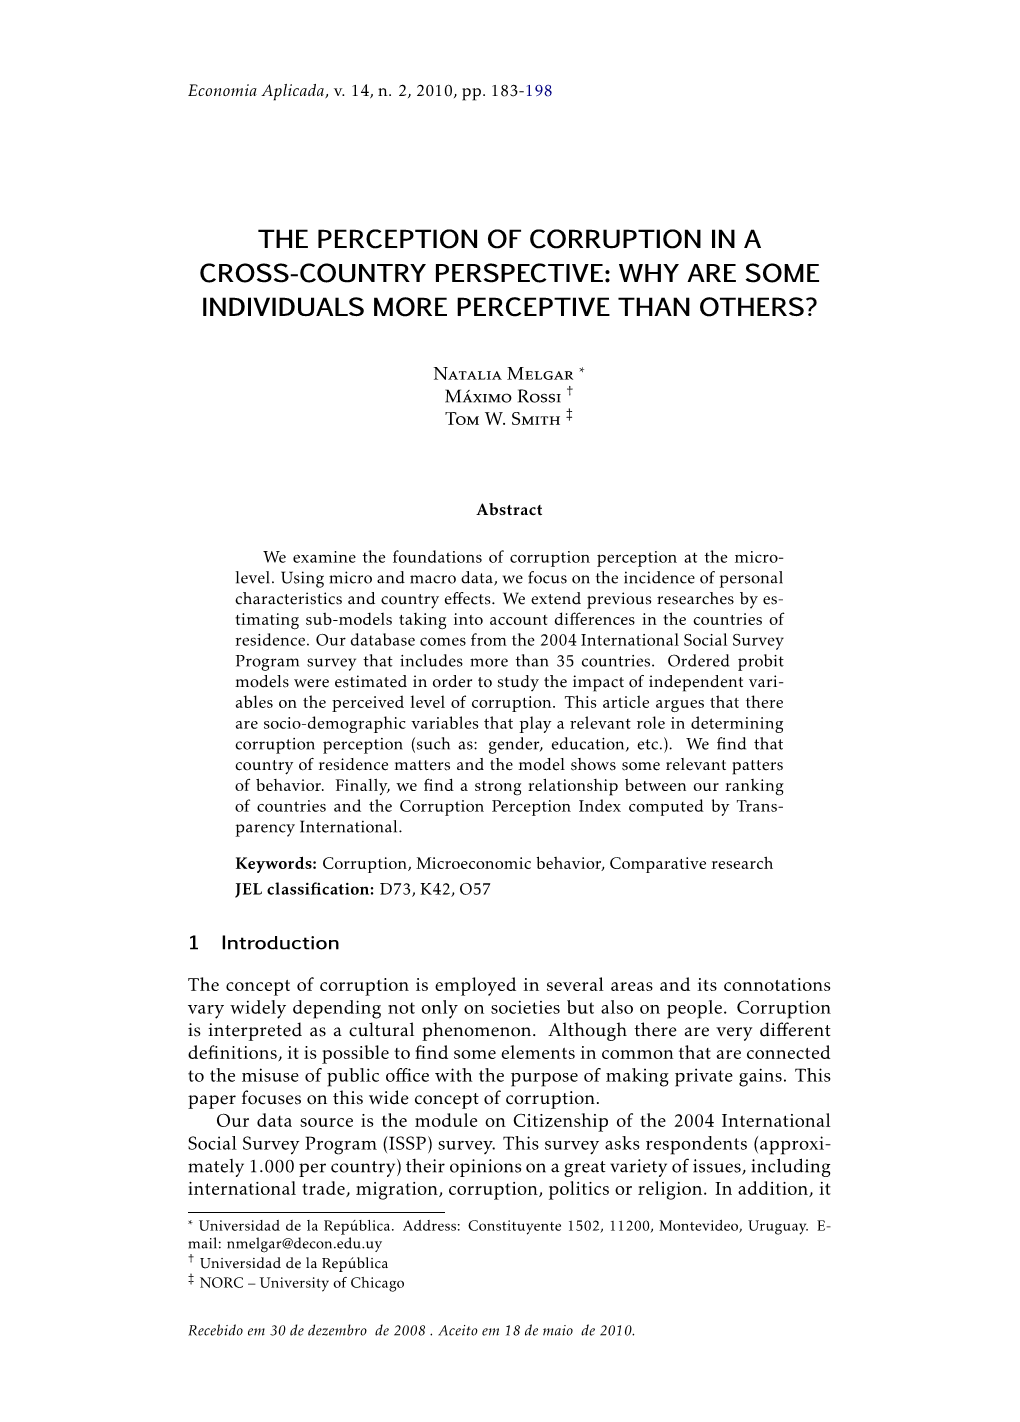 The Perception of Corruption in a Cross-Country Perspective: Why Are Some Individuals More Perceptive Than Others?